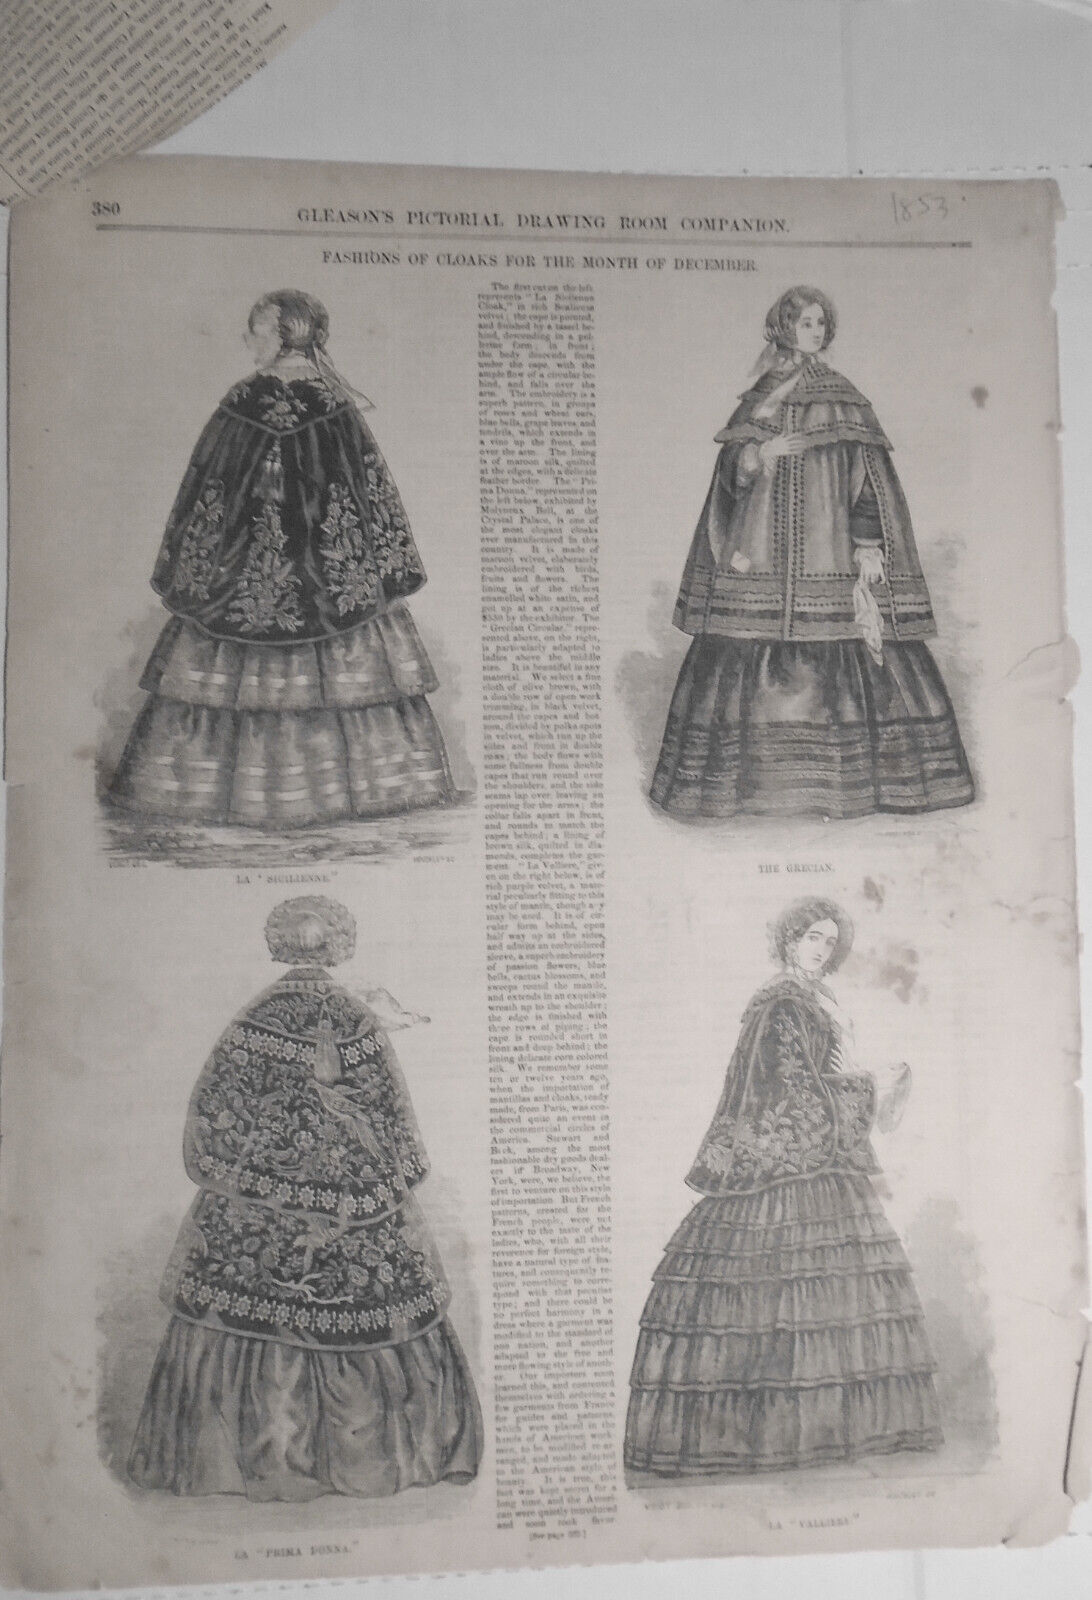 Mantilla Cloaks - Fashions Of  For The Month Of December - Gleason's  1853